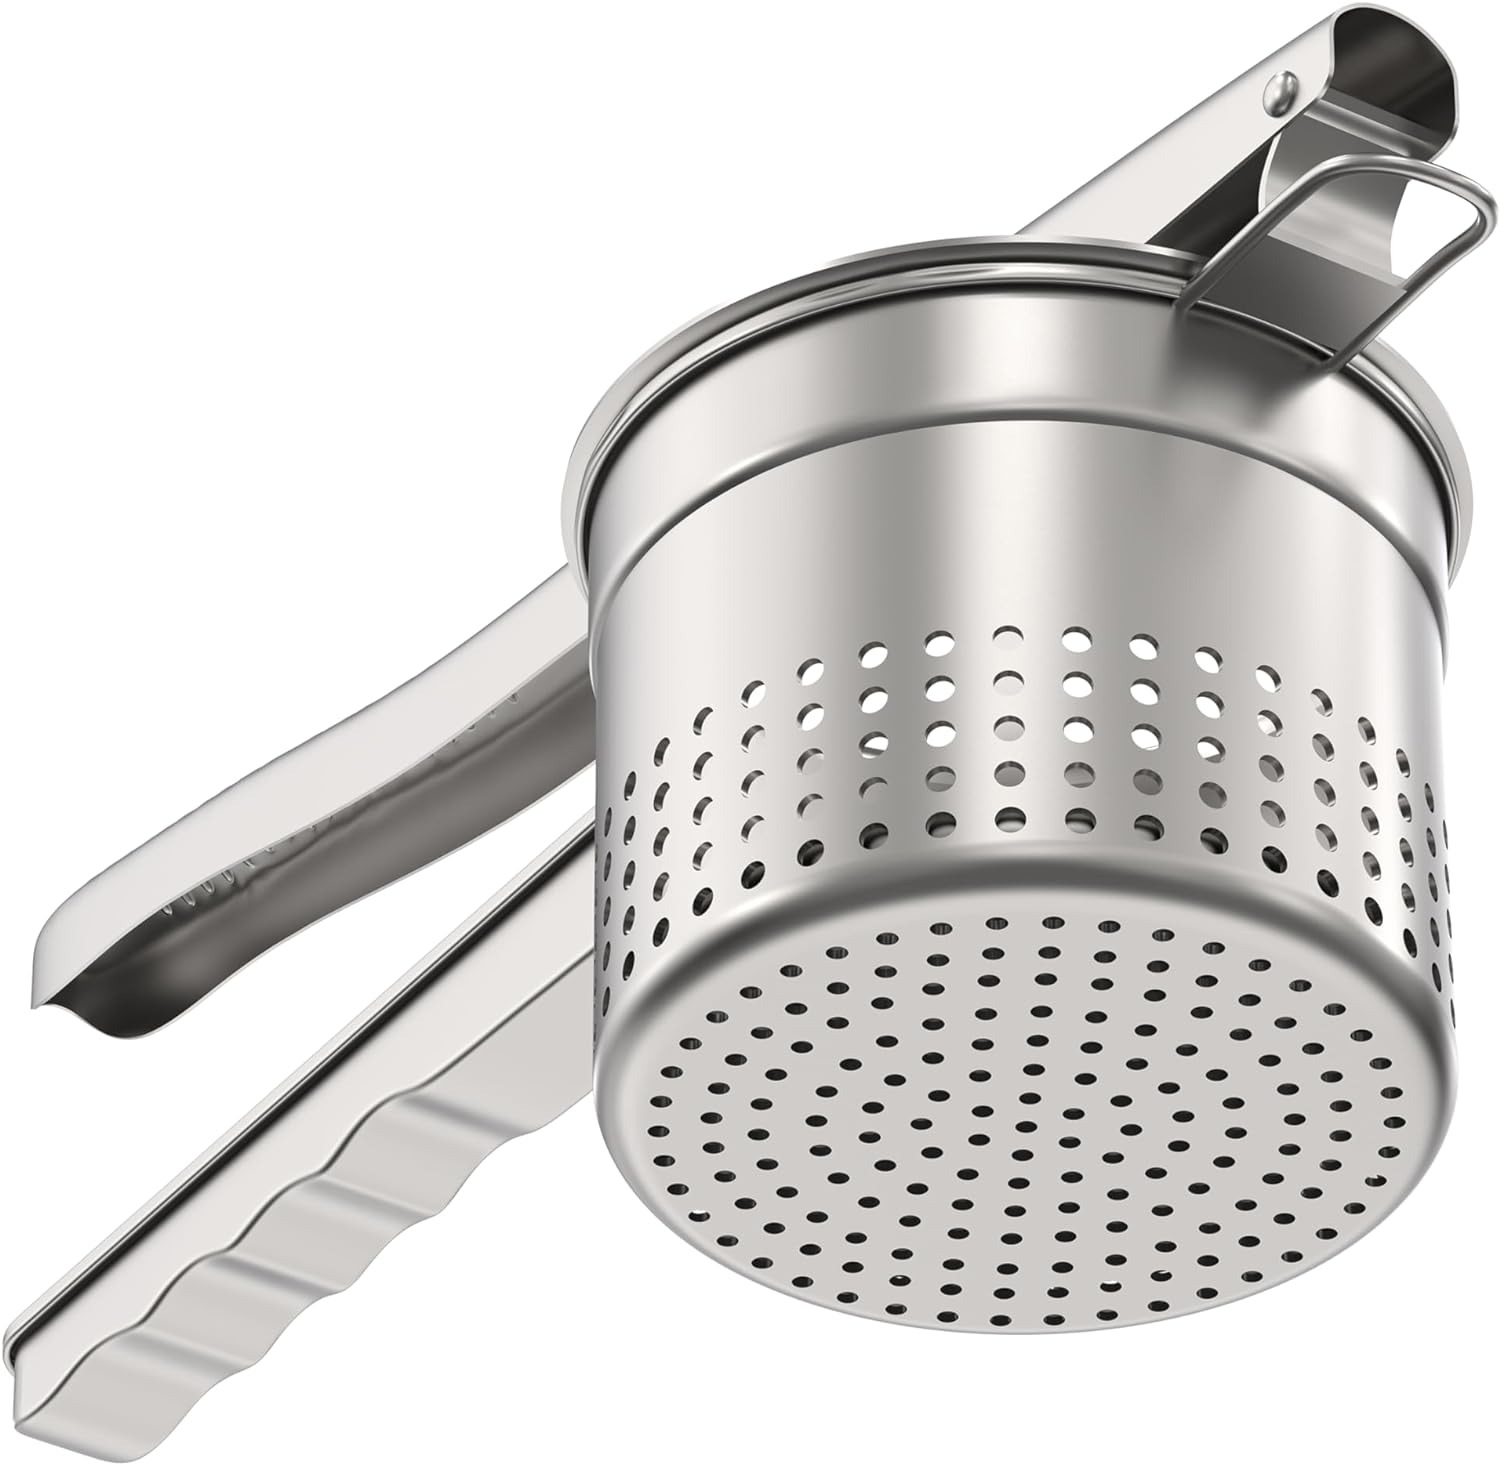 Large 15Oz Potato Ricer, Heavy Duty Stainless Steel Ricer for Mashed Potatoes, S